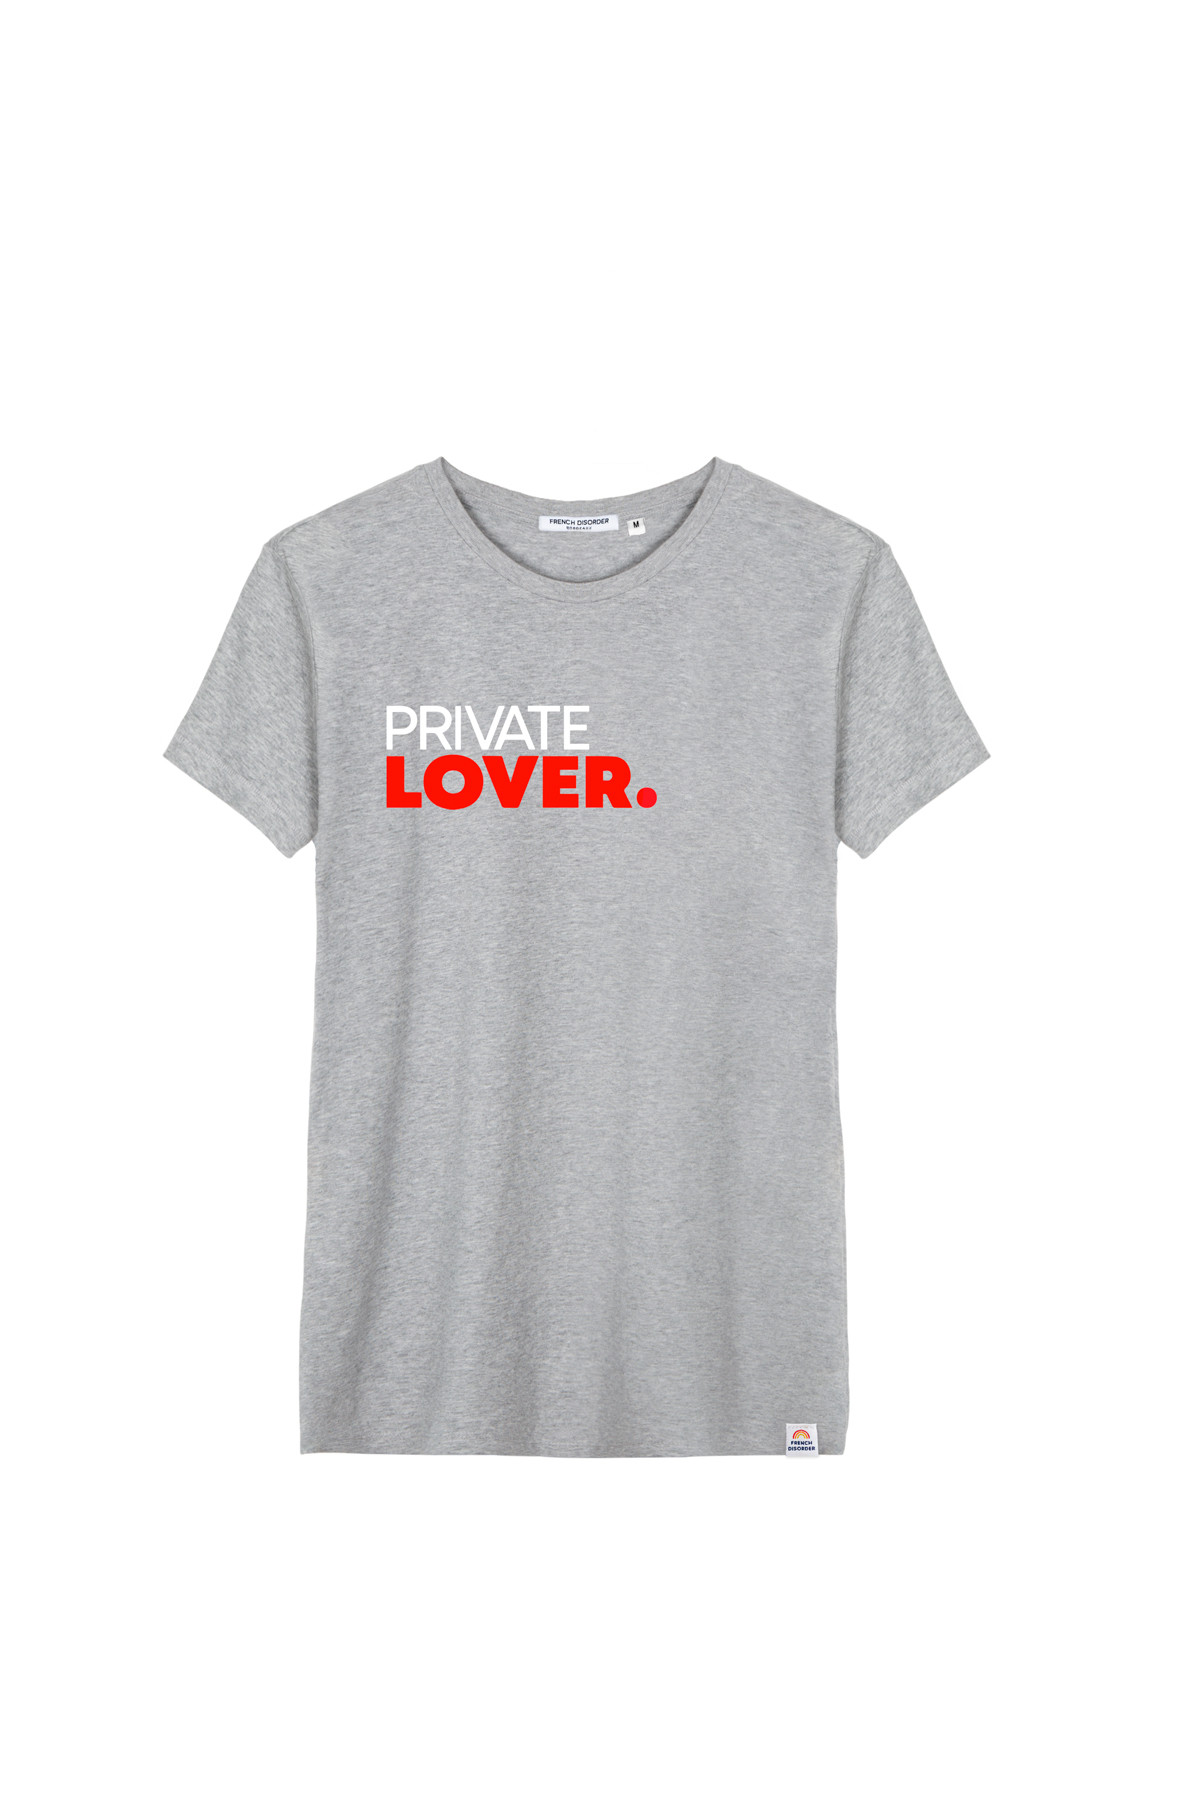 Tshirt PRIVATE LOVER French Disorder